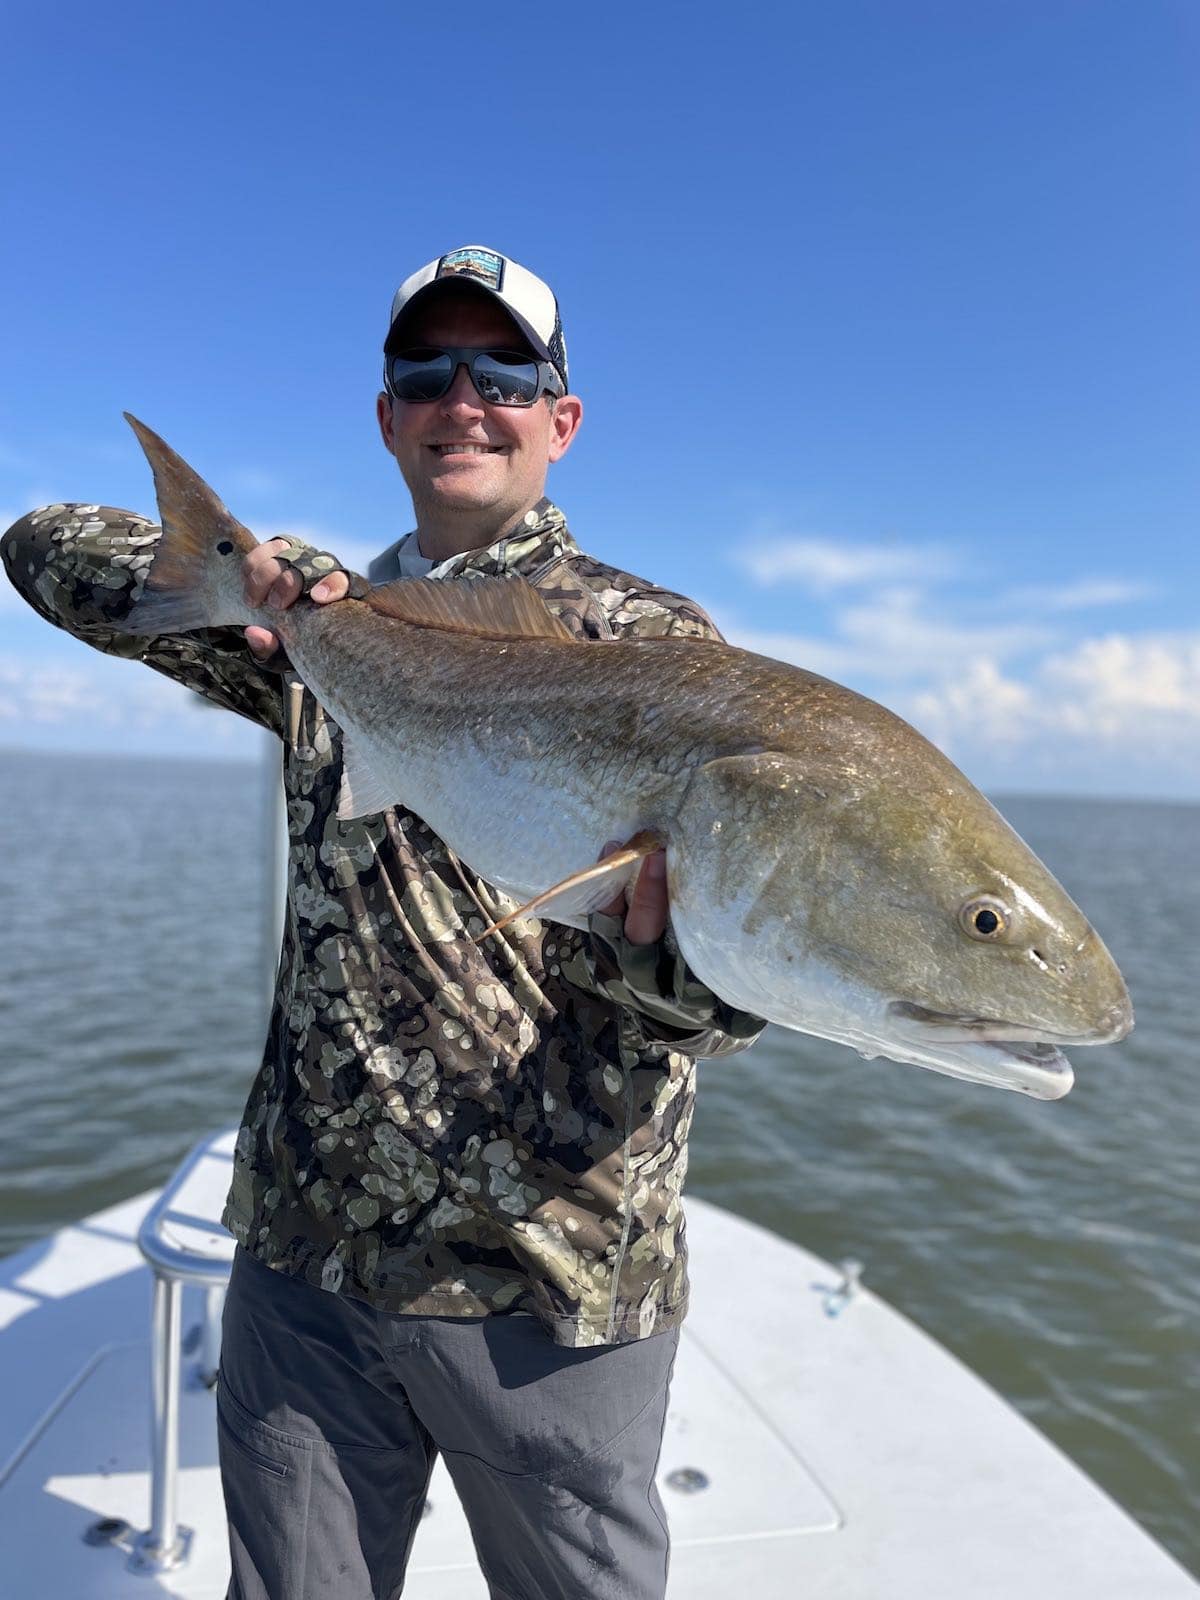 Big redfish caught while fly fishing in Louisiana